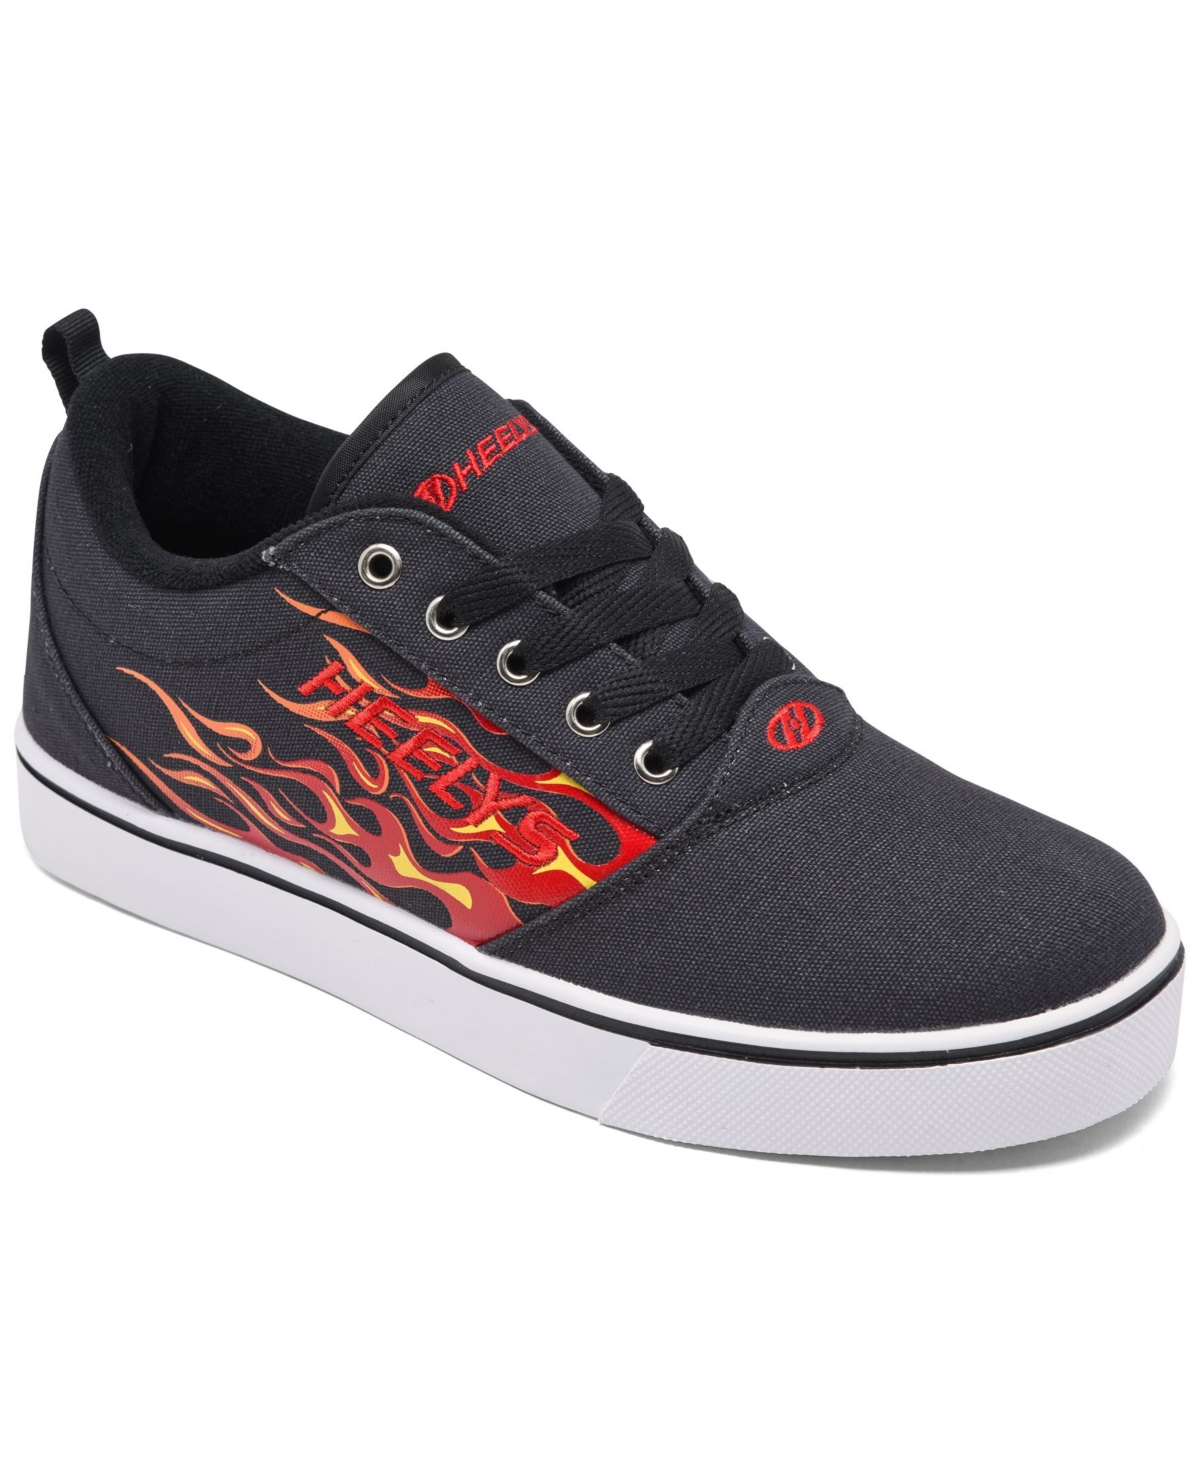 Heelys Kids' Boys Pro 20 Flame Wheeled Skate Casual Sneakers From Finish Line In Black,red,flame